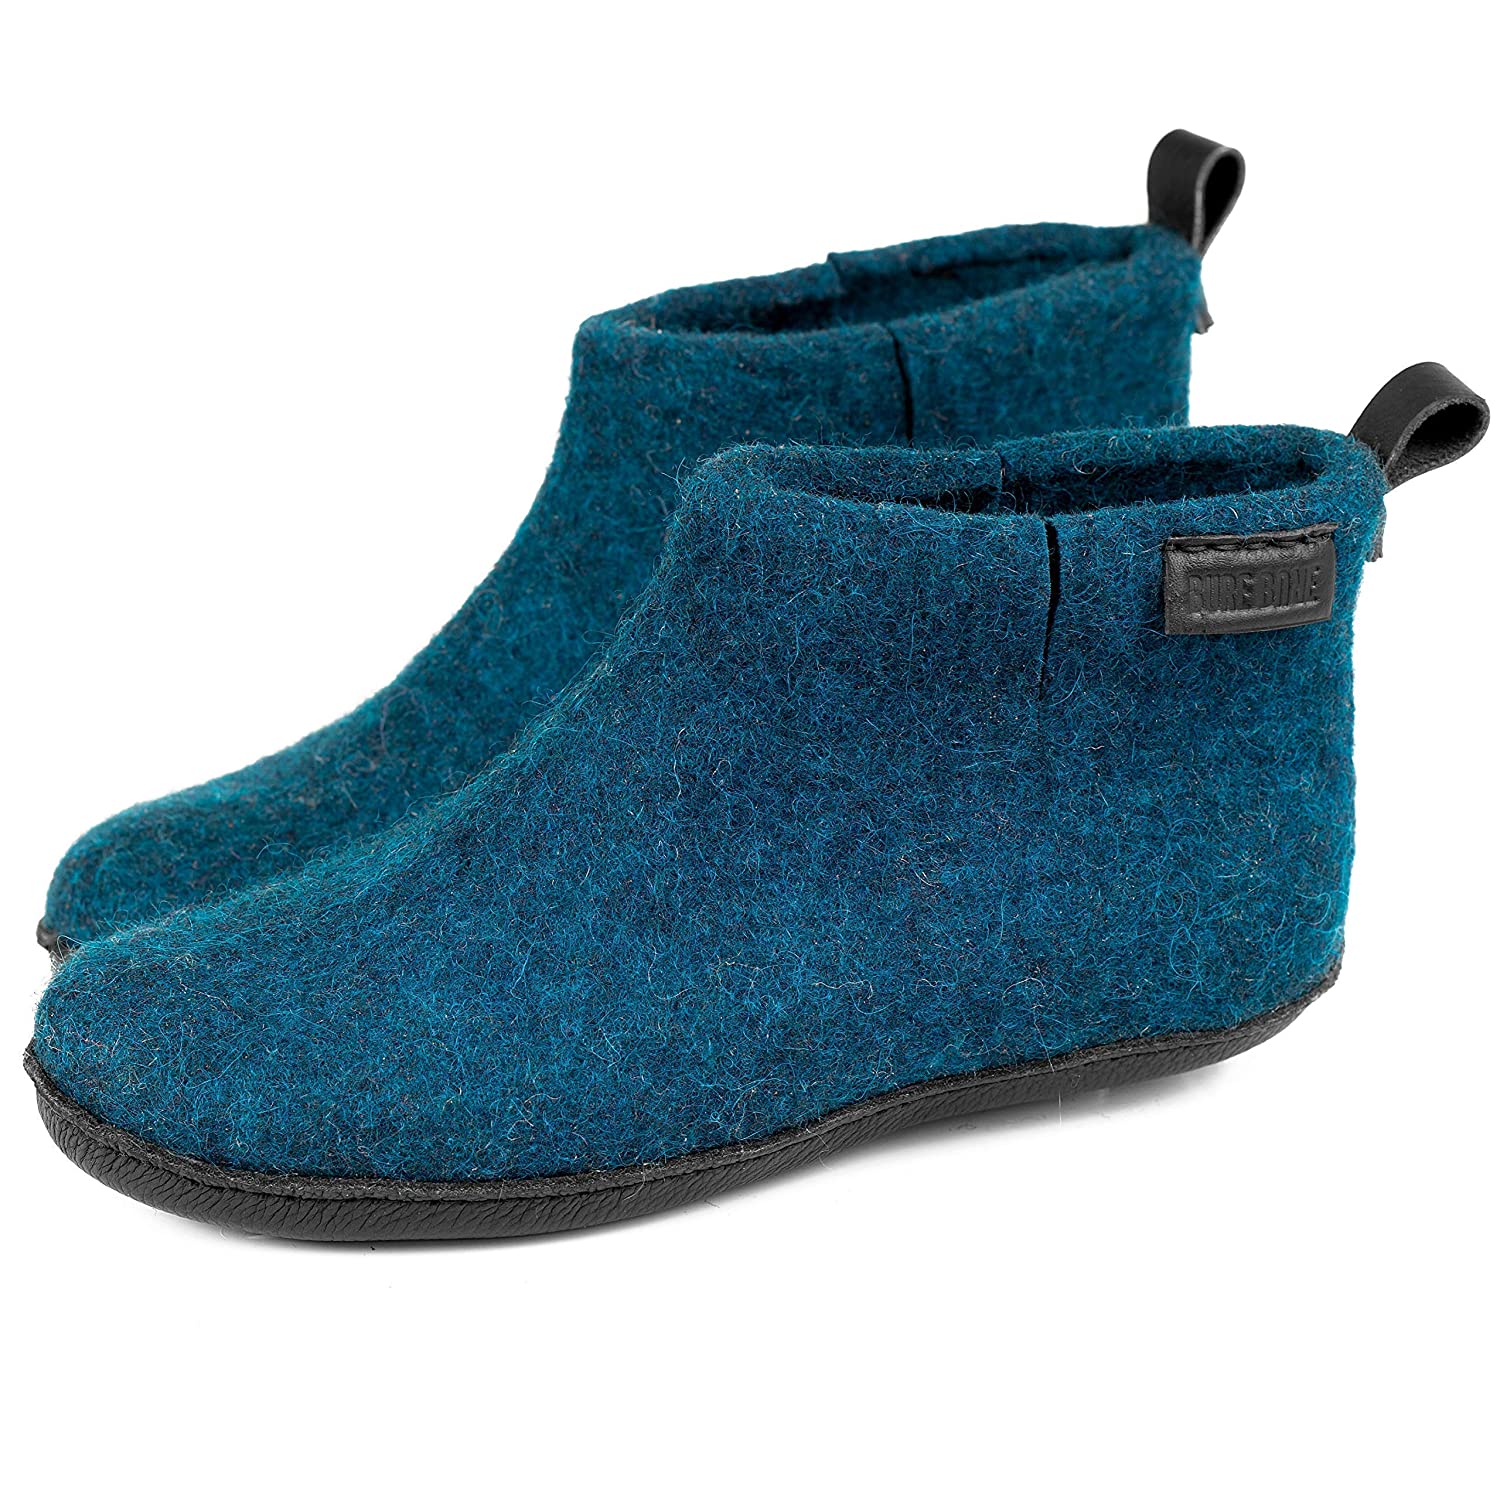 BureBure Classic Felted Wool Ankle Boots Slippers for Men Handmade in Europe